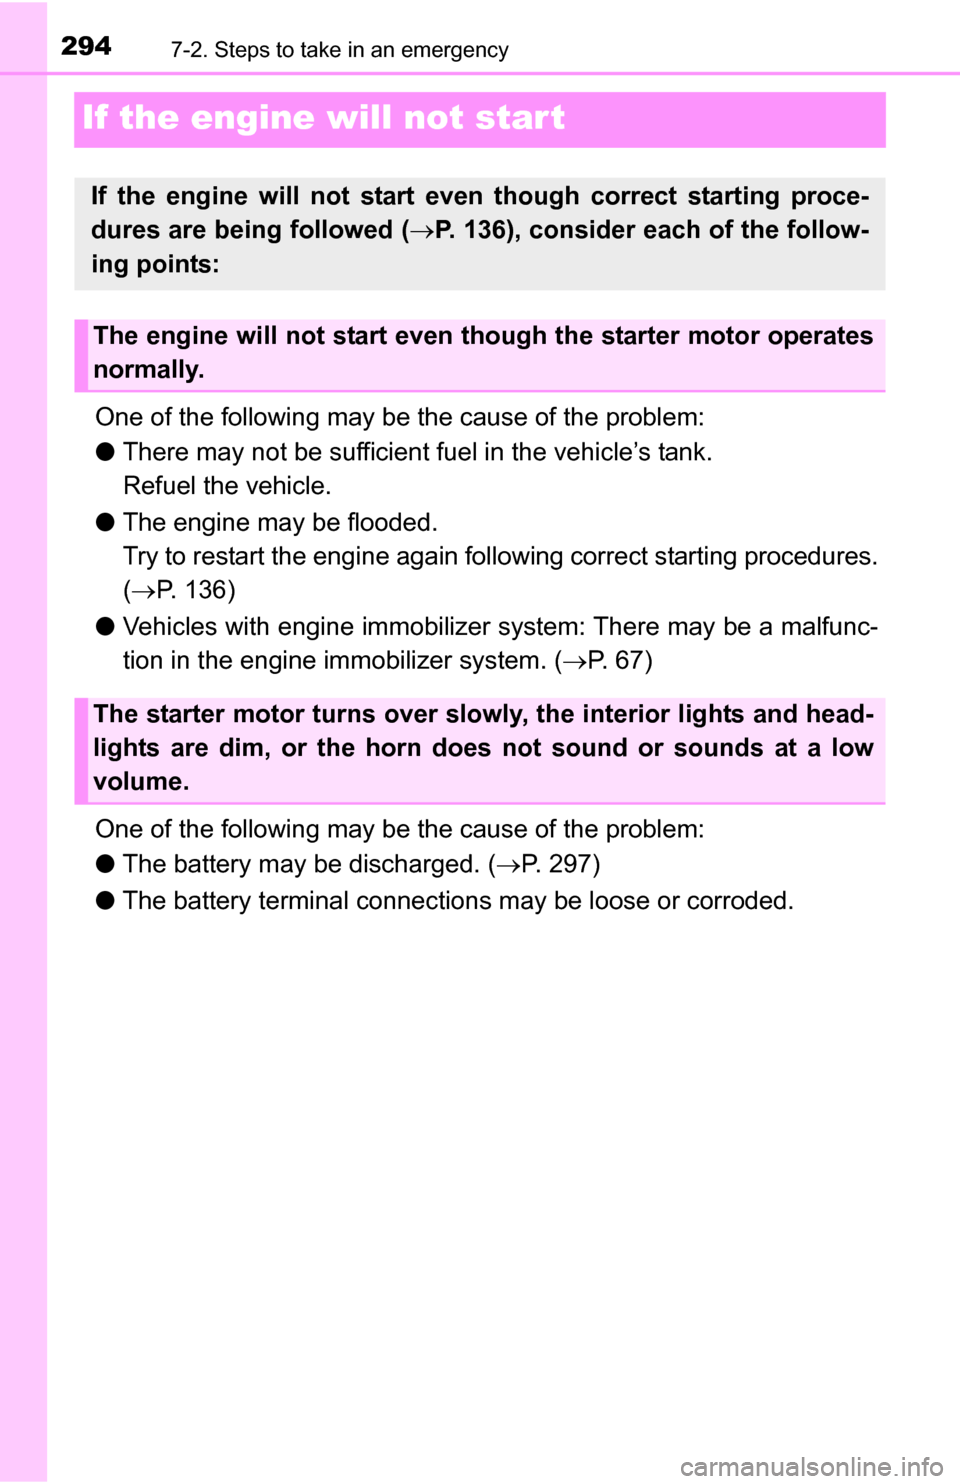 TOYOTA YARIS 2016 3.G Owners Manual 2947-2. Steps to take in an emergency
If the engine will not start
One of the following may be the cause of the problem:
●There may not be sufficient fuel in the vehicle’s tank. 
Refuel the vehicl